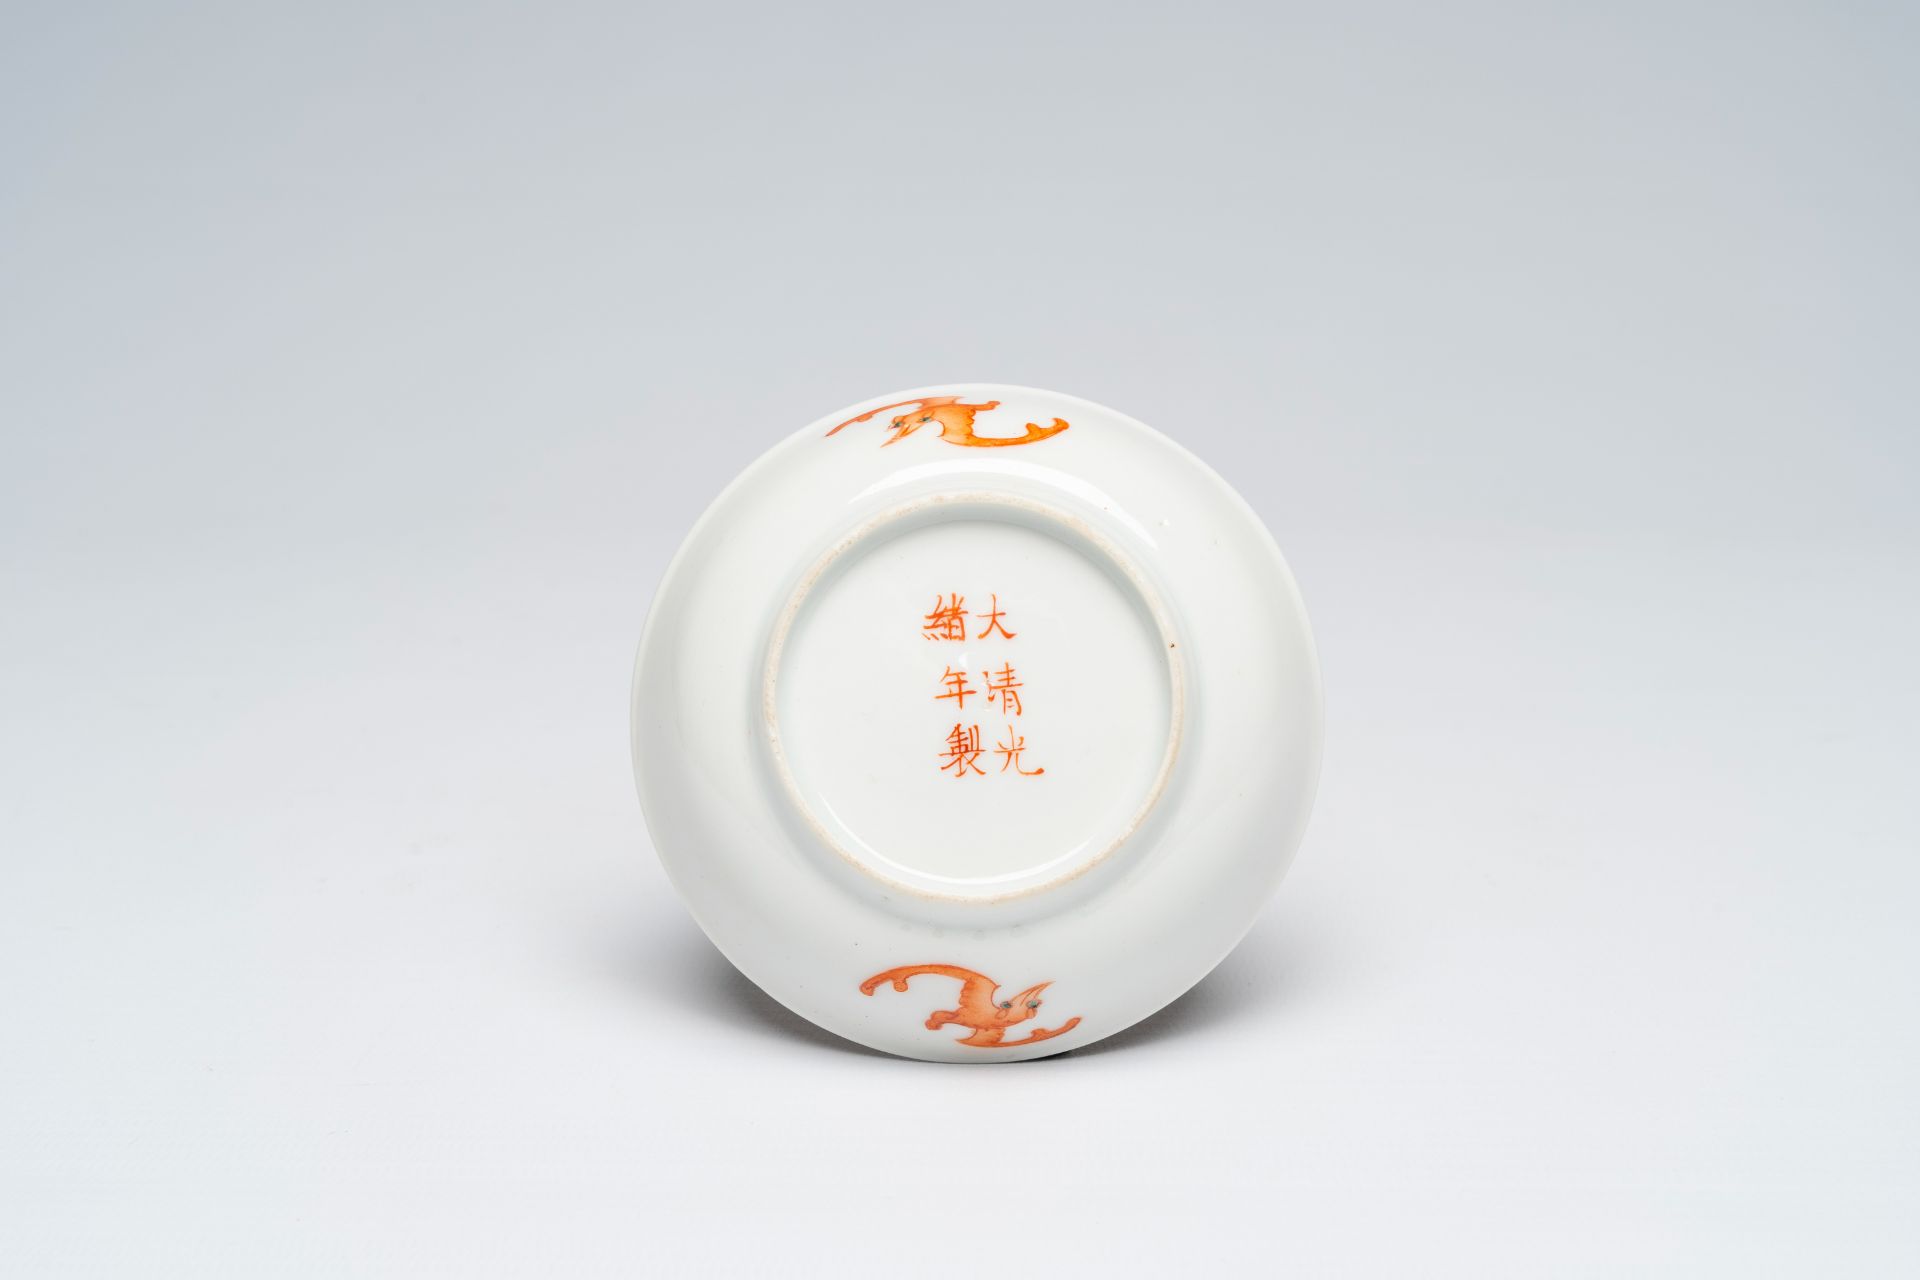 A varied collection of Chinese and Japanese porcelain, 18th C. and later - Image 9 of 9